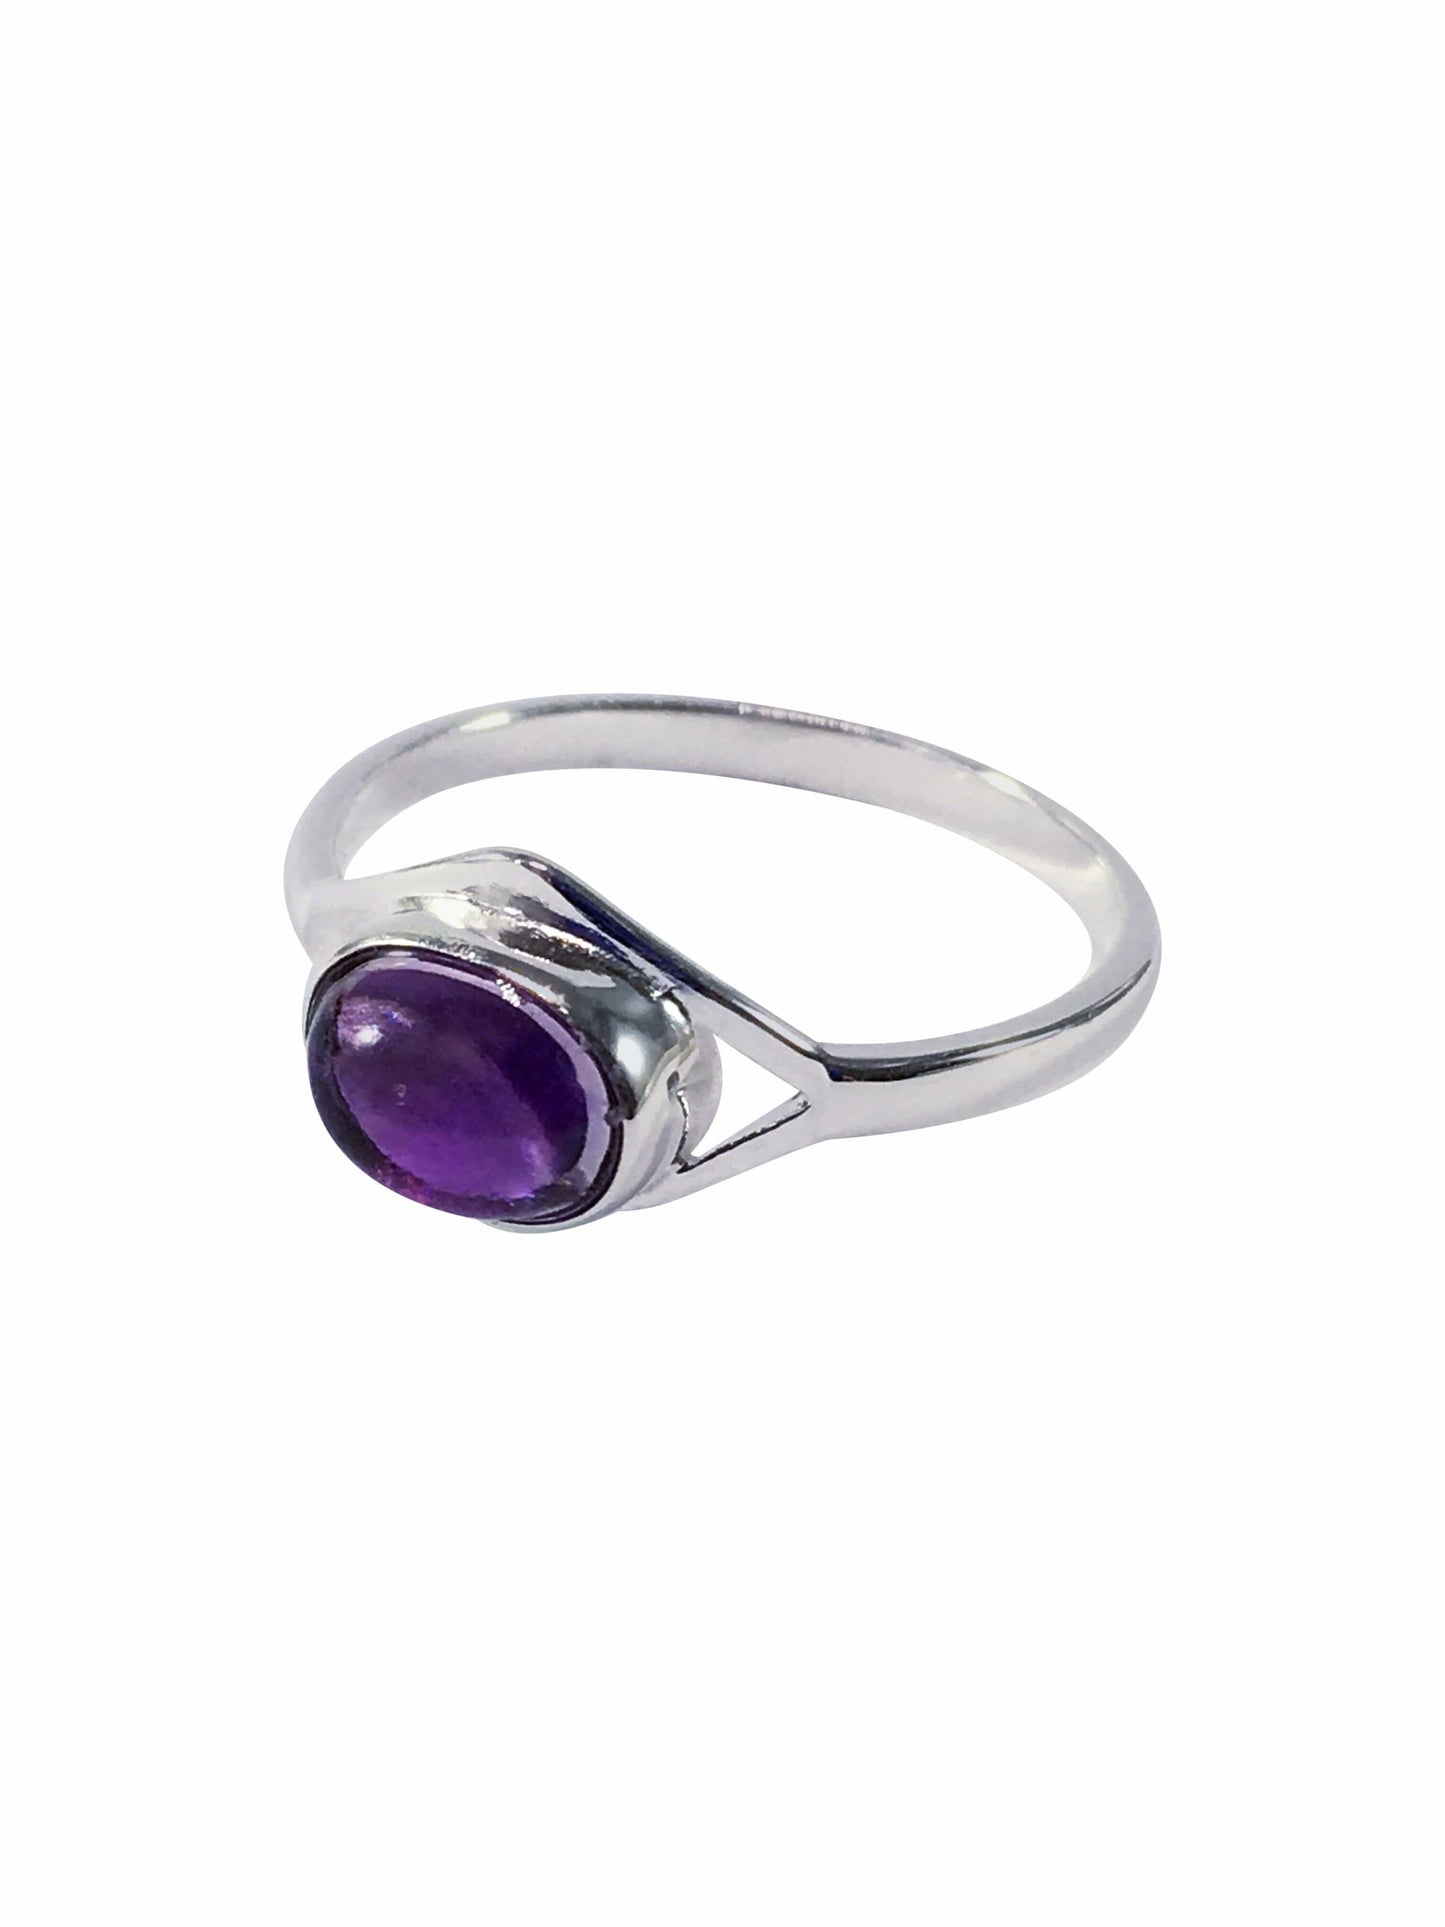 Oval Amethyst Gemstone And Sterling Silver Ring